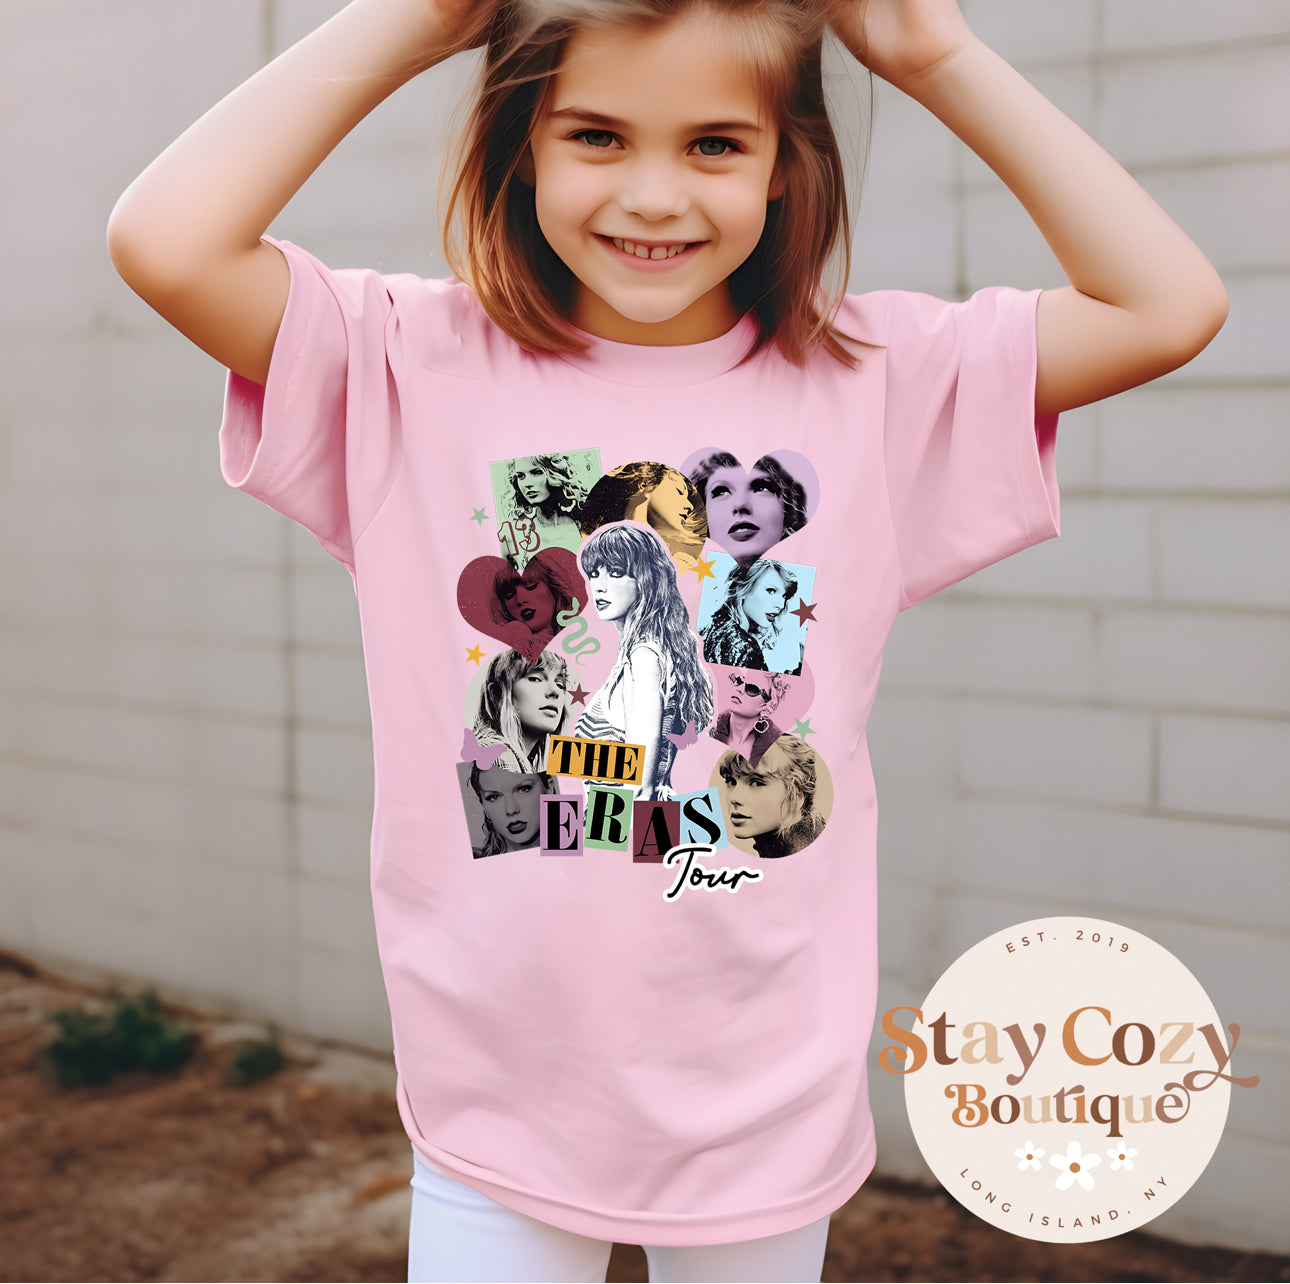 Youth Swiftie The Eras Tour T-Shirt, Youth Swiftie Shirt, Trendy Sweatshirt, Swiftie Youth Shirt